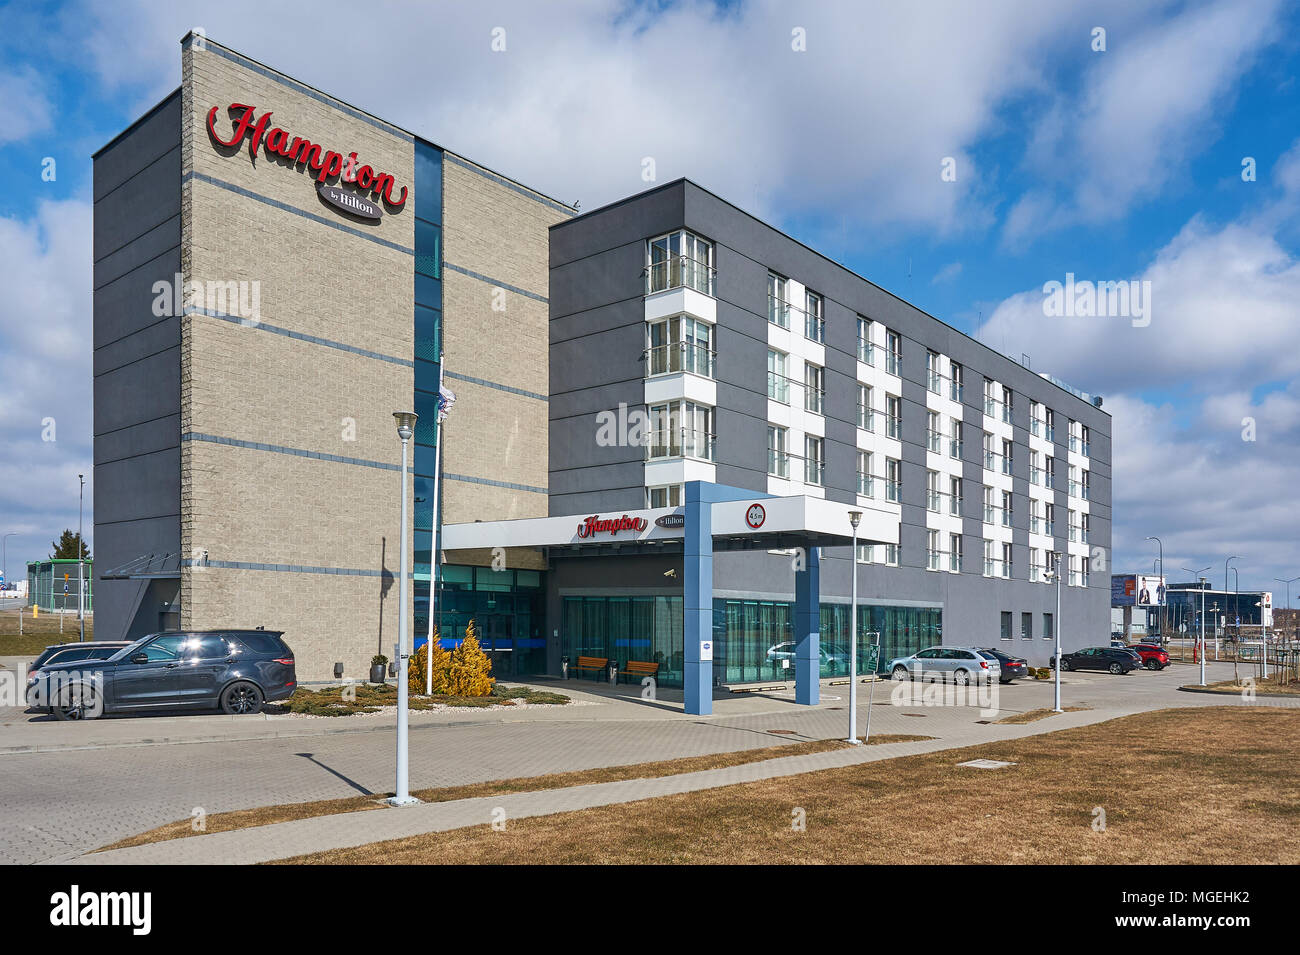 Hampton hotel by Hilton at the Lech Walesa airport in Gdansk, Poland. Stock Photo